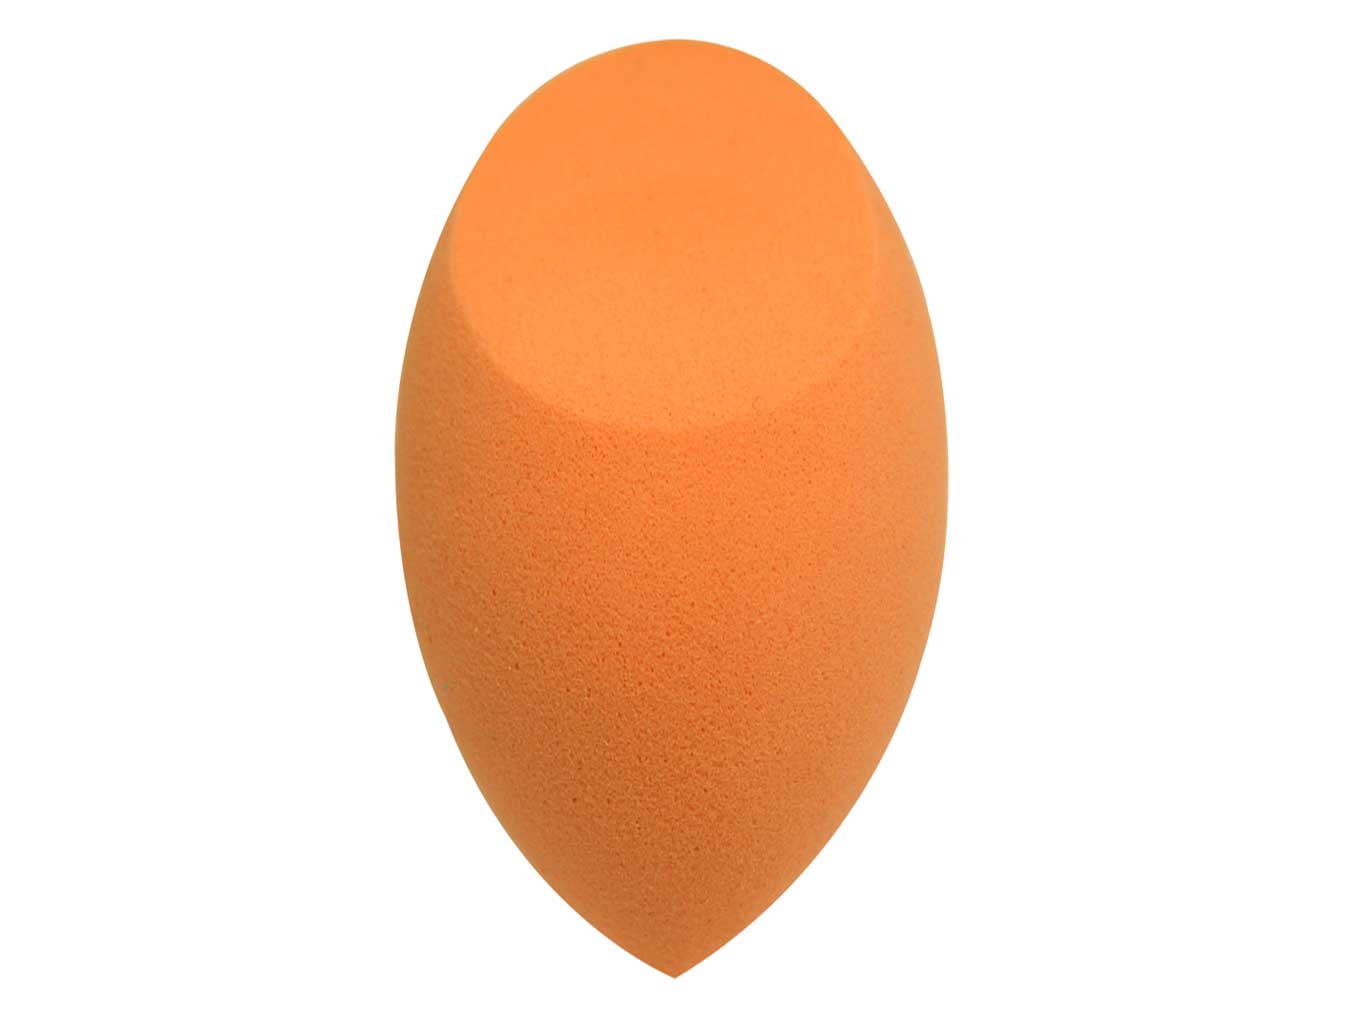 Real Techniques Miracle Complexion Sponge is a Must Have!